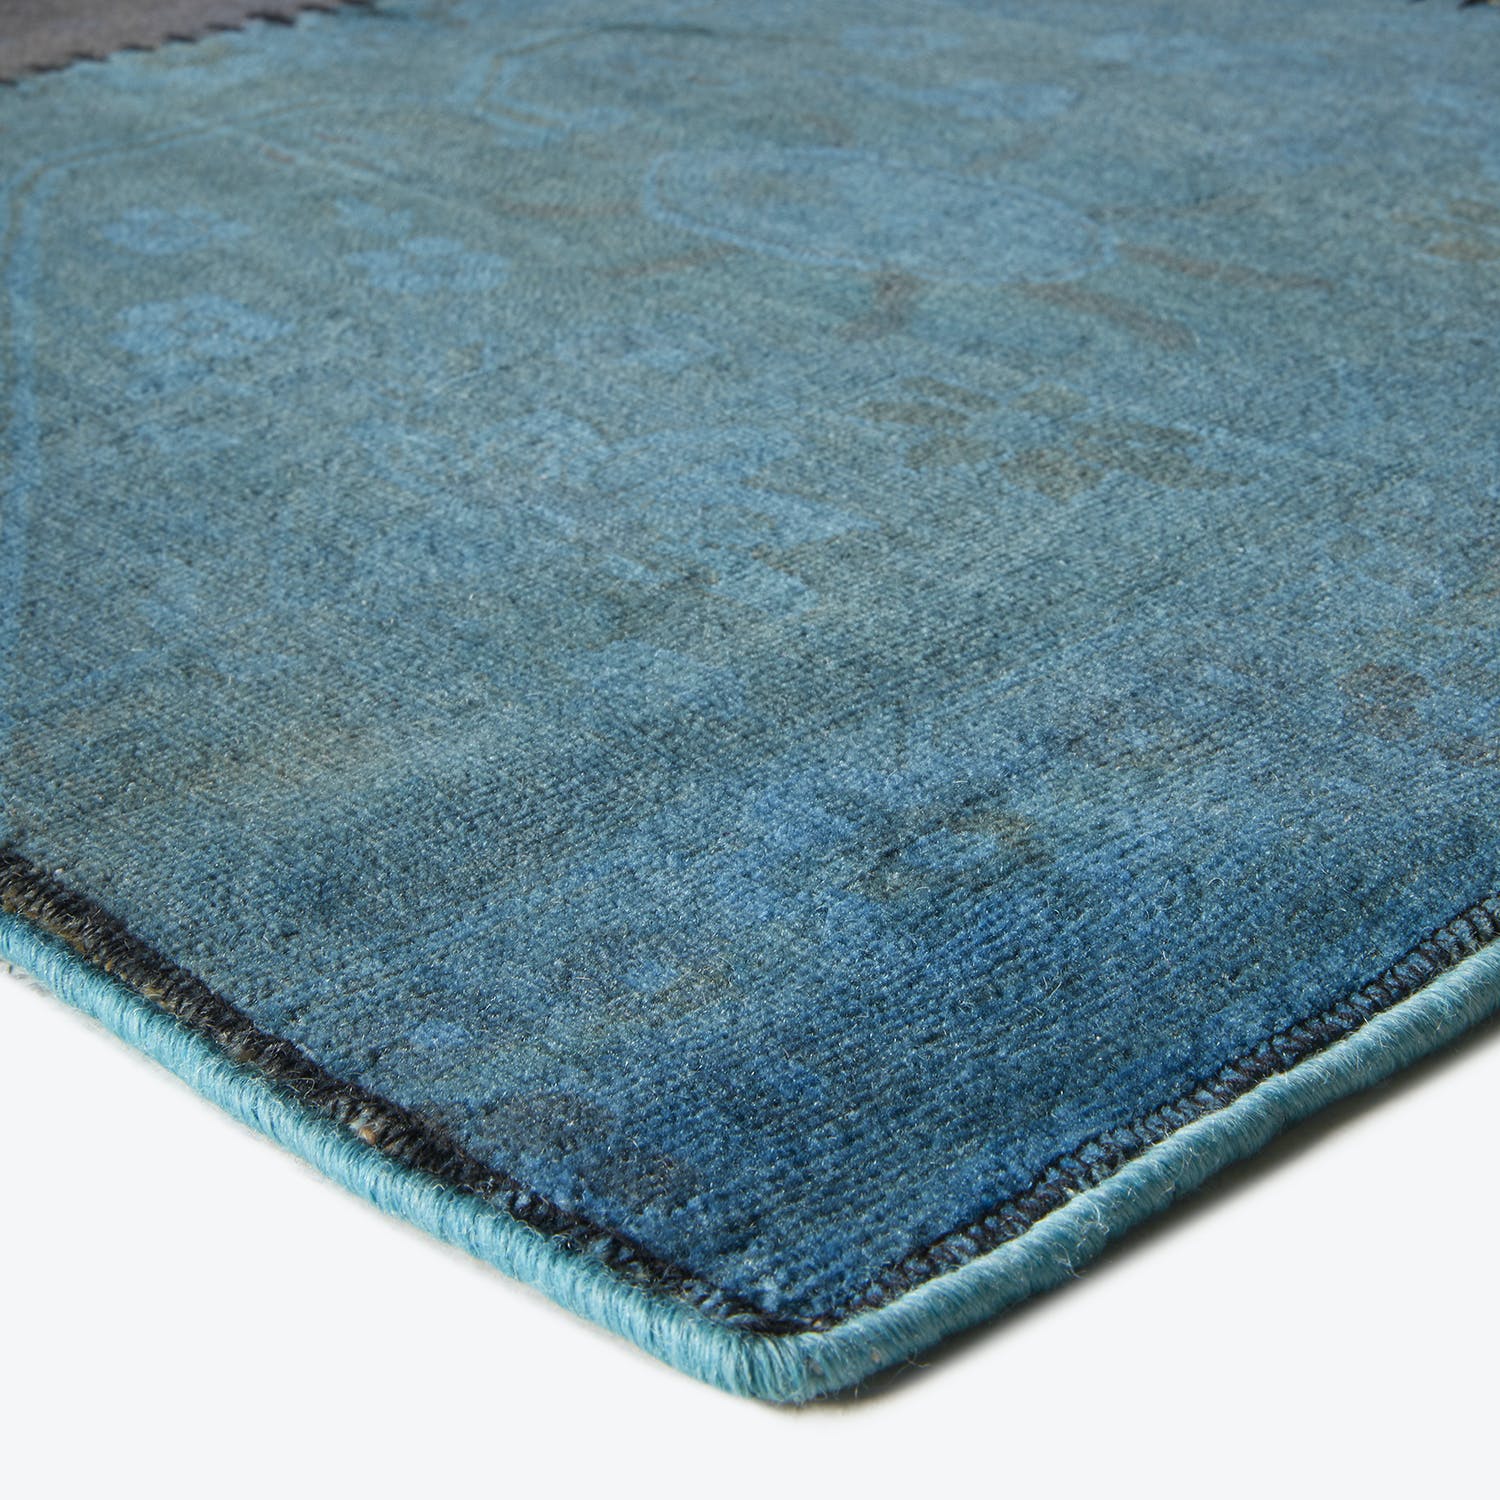 Close-up of a faded blue rug with plush, textured fibers.